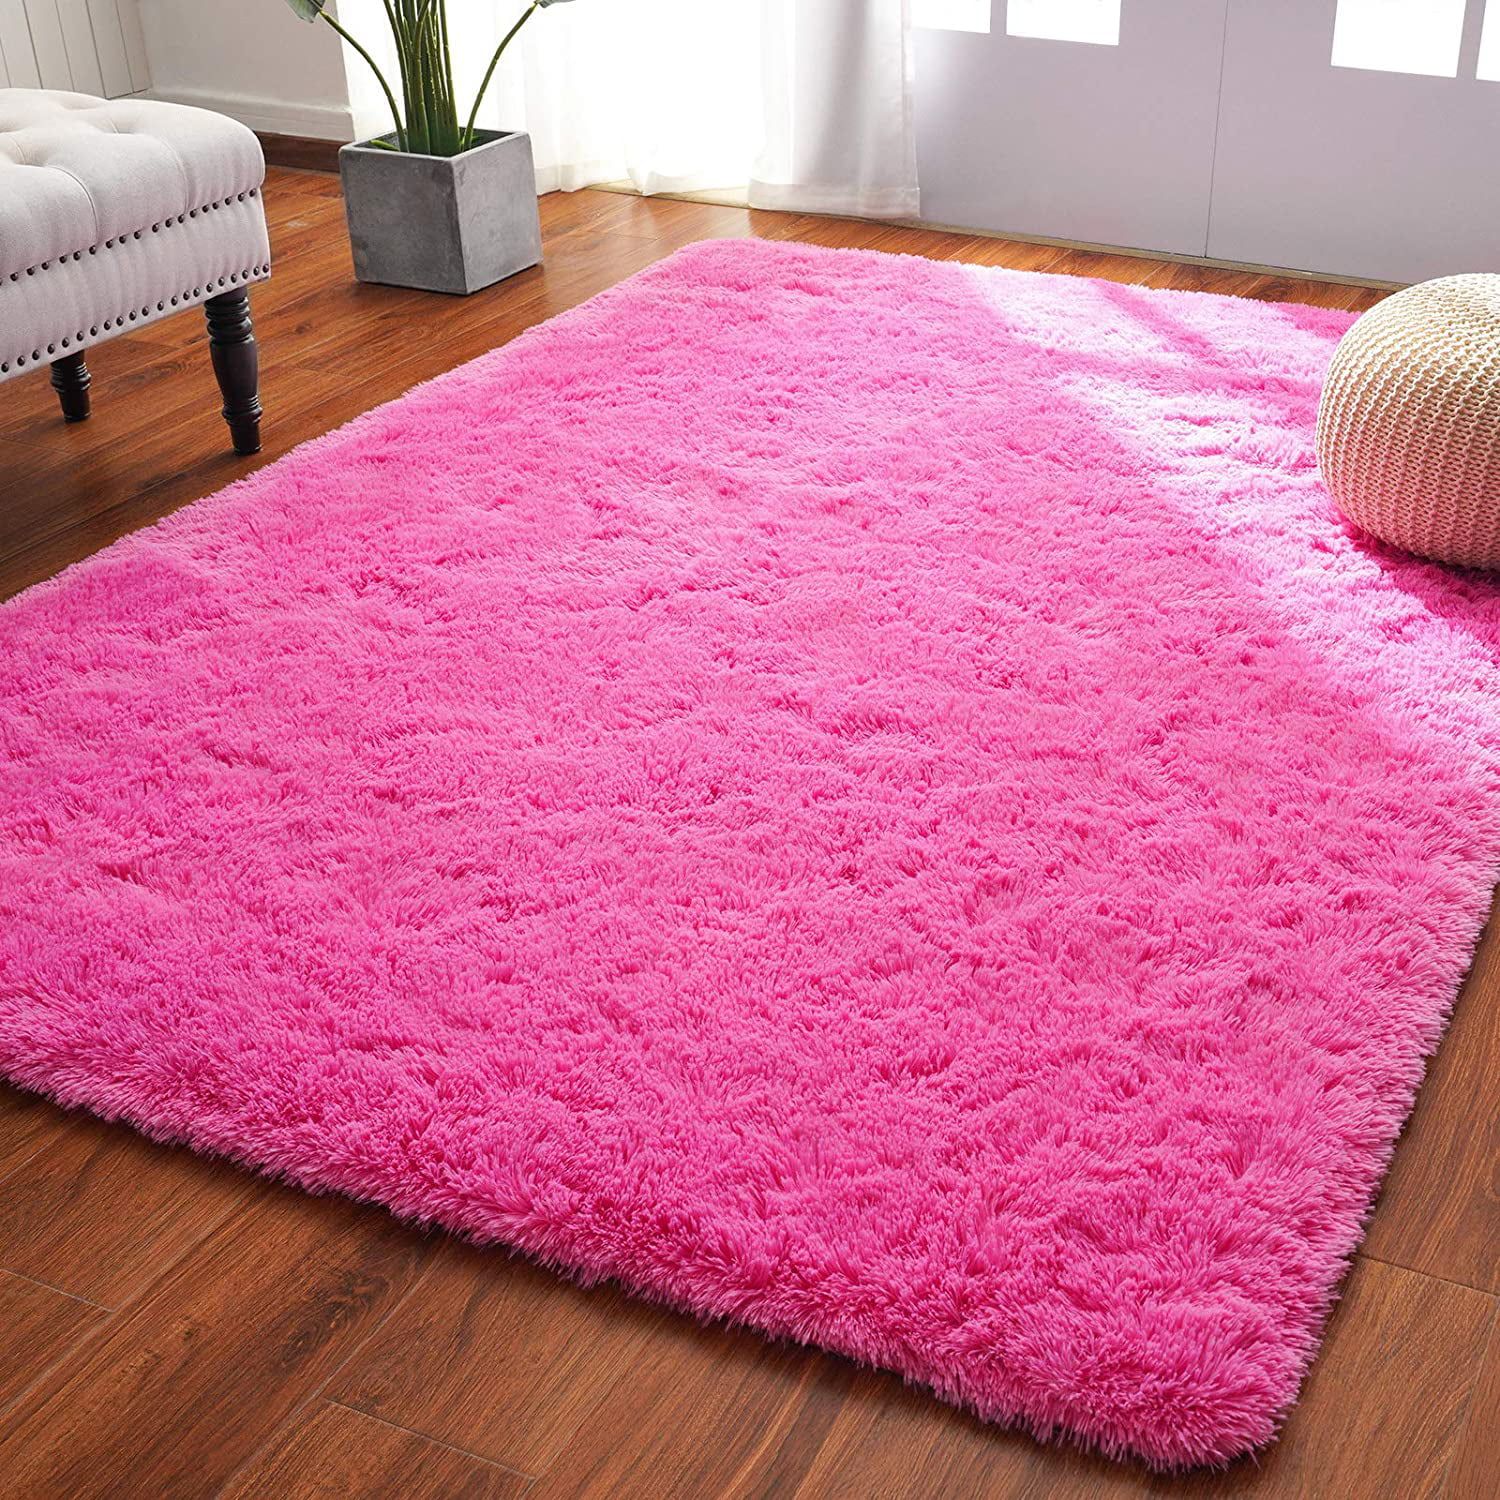 Arogan Super Soft Fluffy Area Rug For Living Room, Shaggy Carpet For  Bedroom Nursery Room,6'x9',hot Pink – Walmart Intended For Pink Soft Touch Shag Rugs (View 3 of 15)